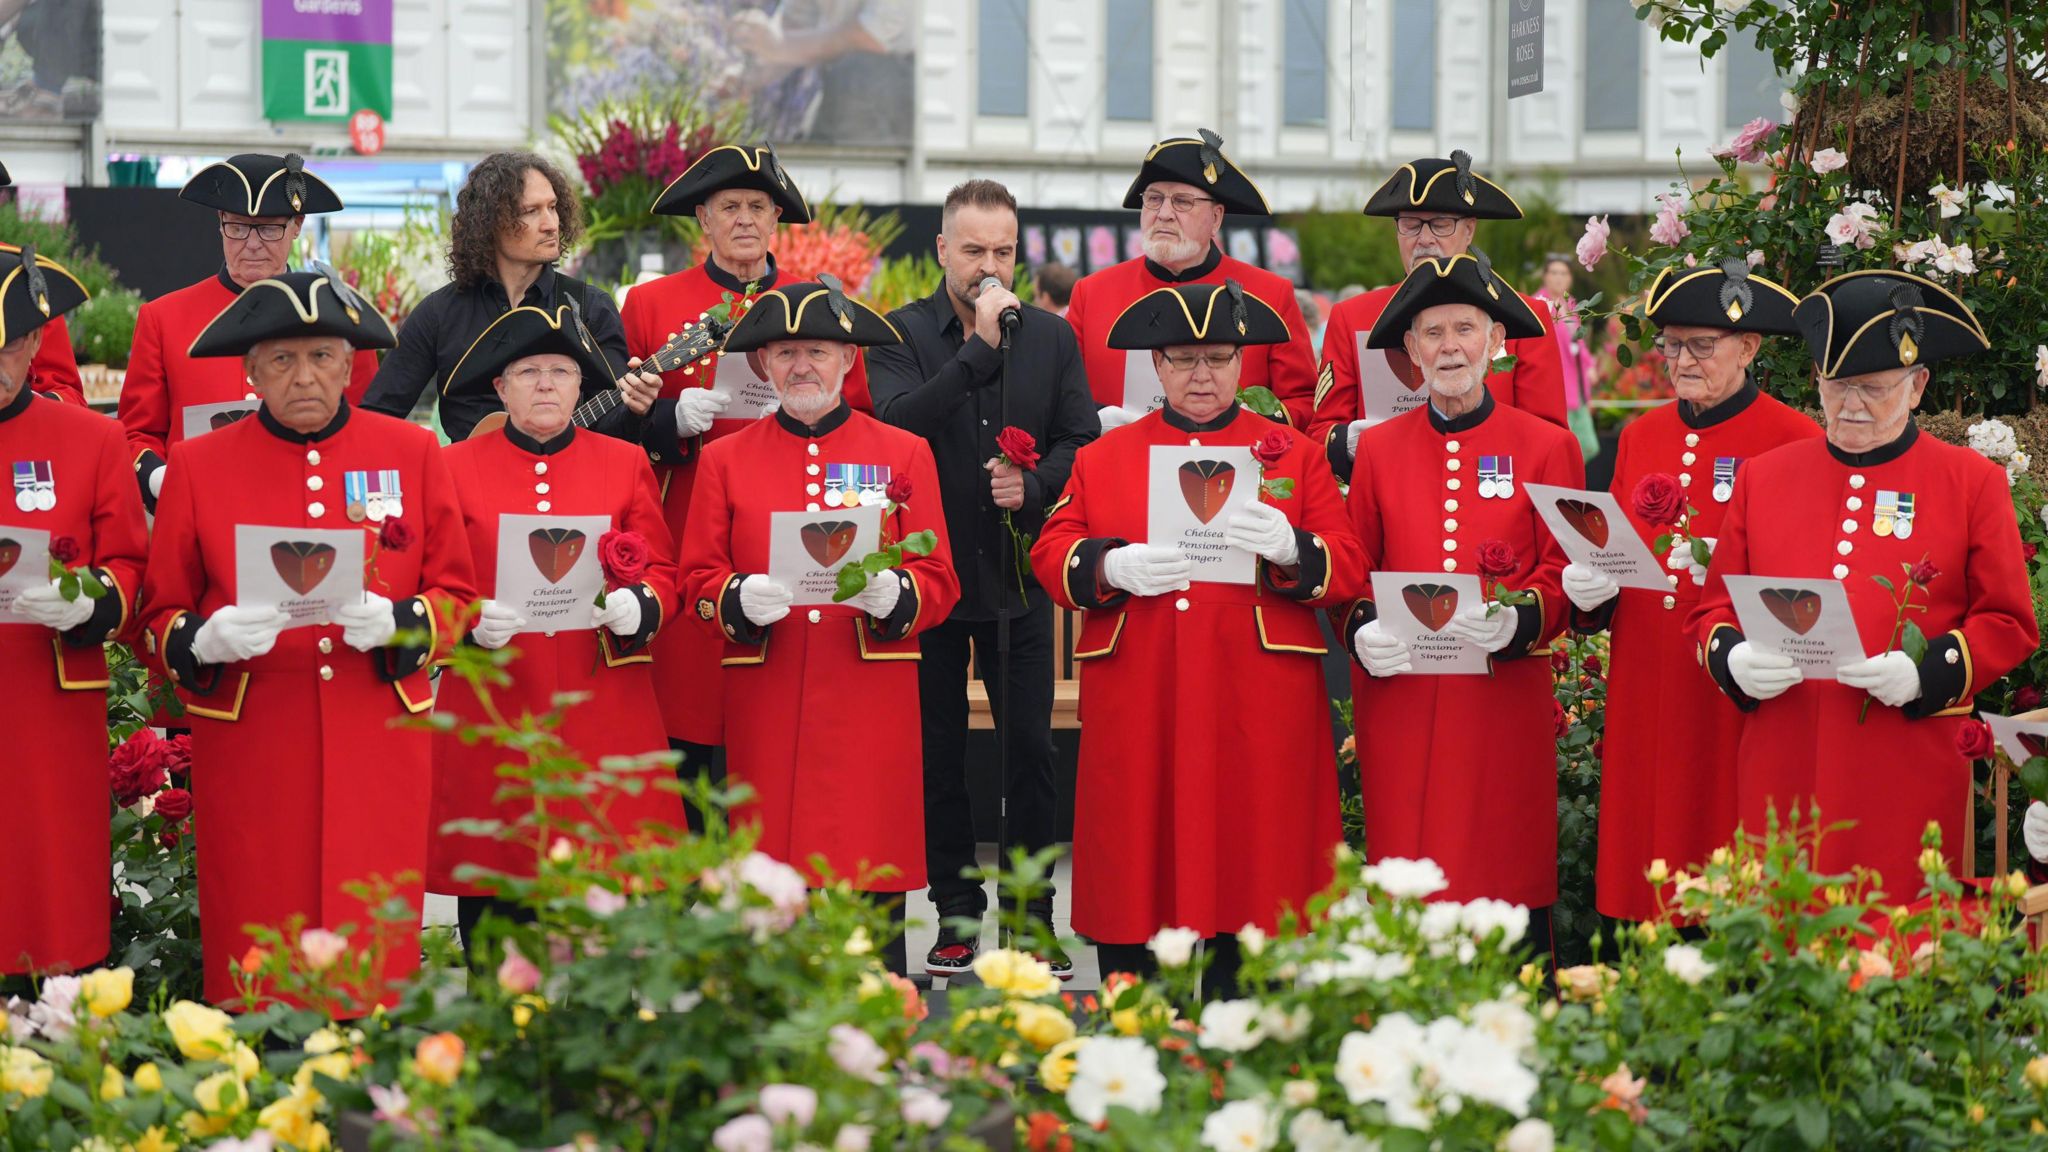 Alfie Boe performs with the Chelsea Pensioners singing group to celebrate the launch of the Harkness Roses Chelsea Pensioner rose